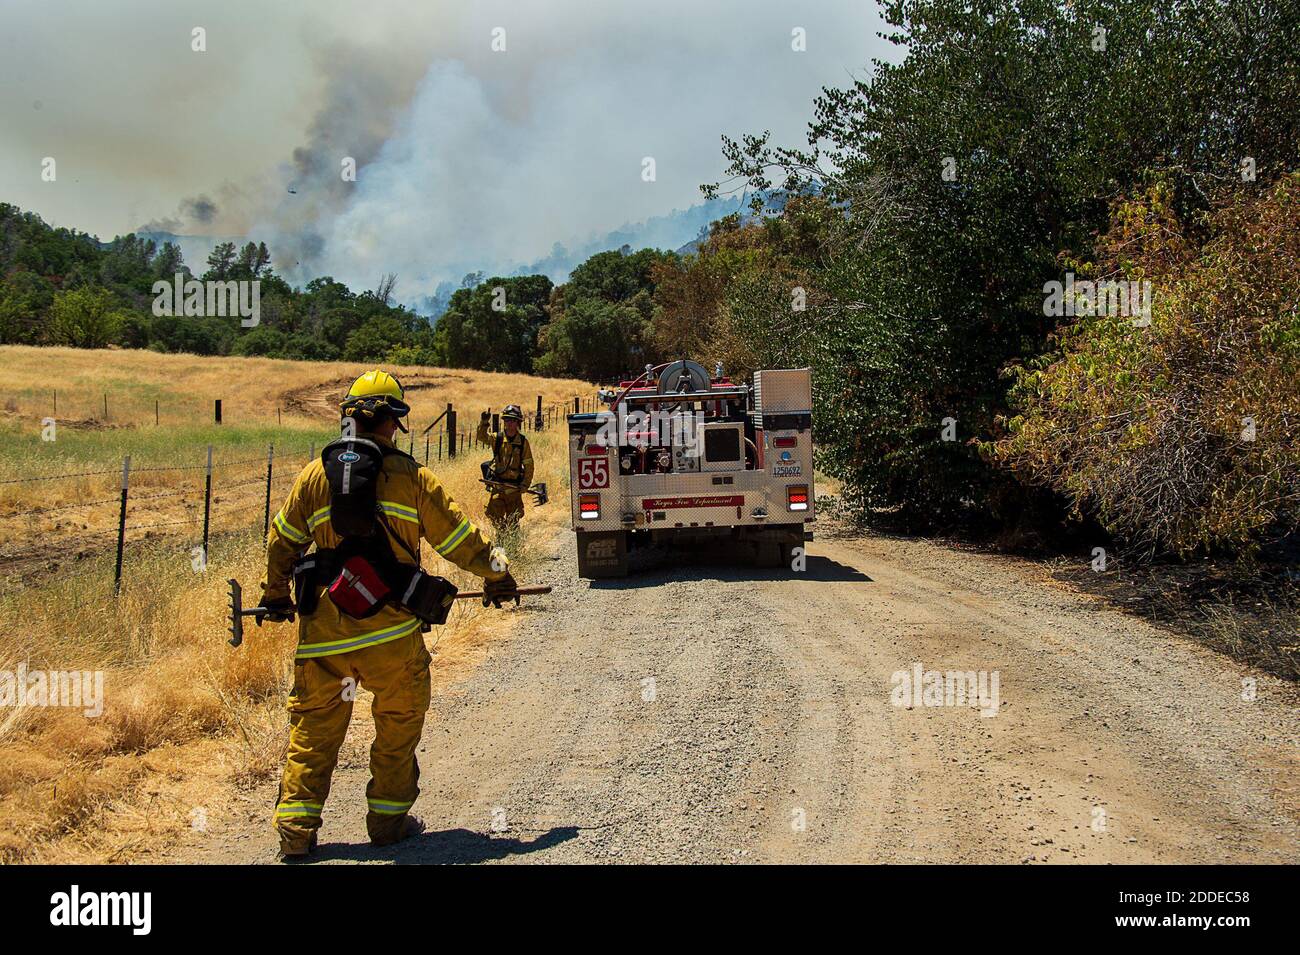 NO FILM, NO VIDEO, NO TV, NO DOCUMENTARY - Keyes firefighters work the County Fire, which has burned more than 22,000 acres without containment, on Sunday, July 1, 2018 in Capay Valley, CA, USA. Photo by Paul Kitagaki Jr./Sacramento Bee/TNS/ABACAPRESS.COM Stock Photo